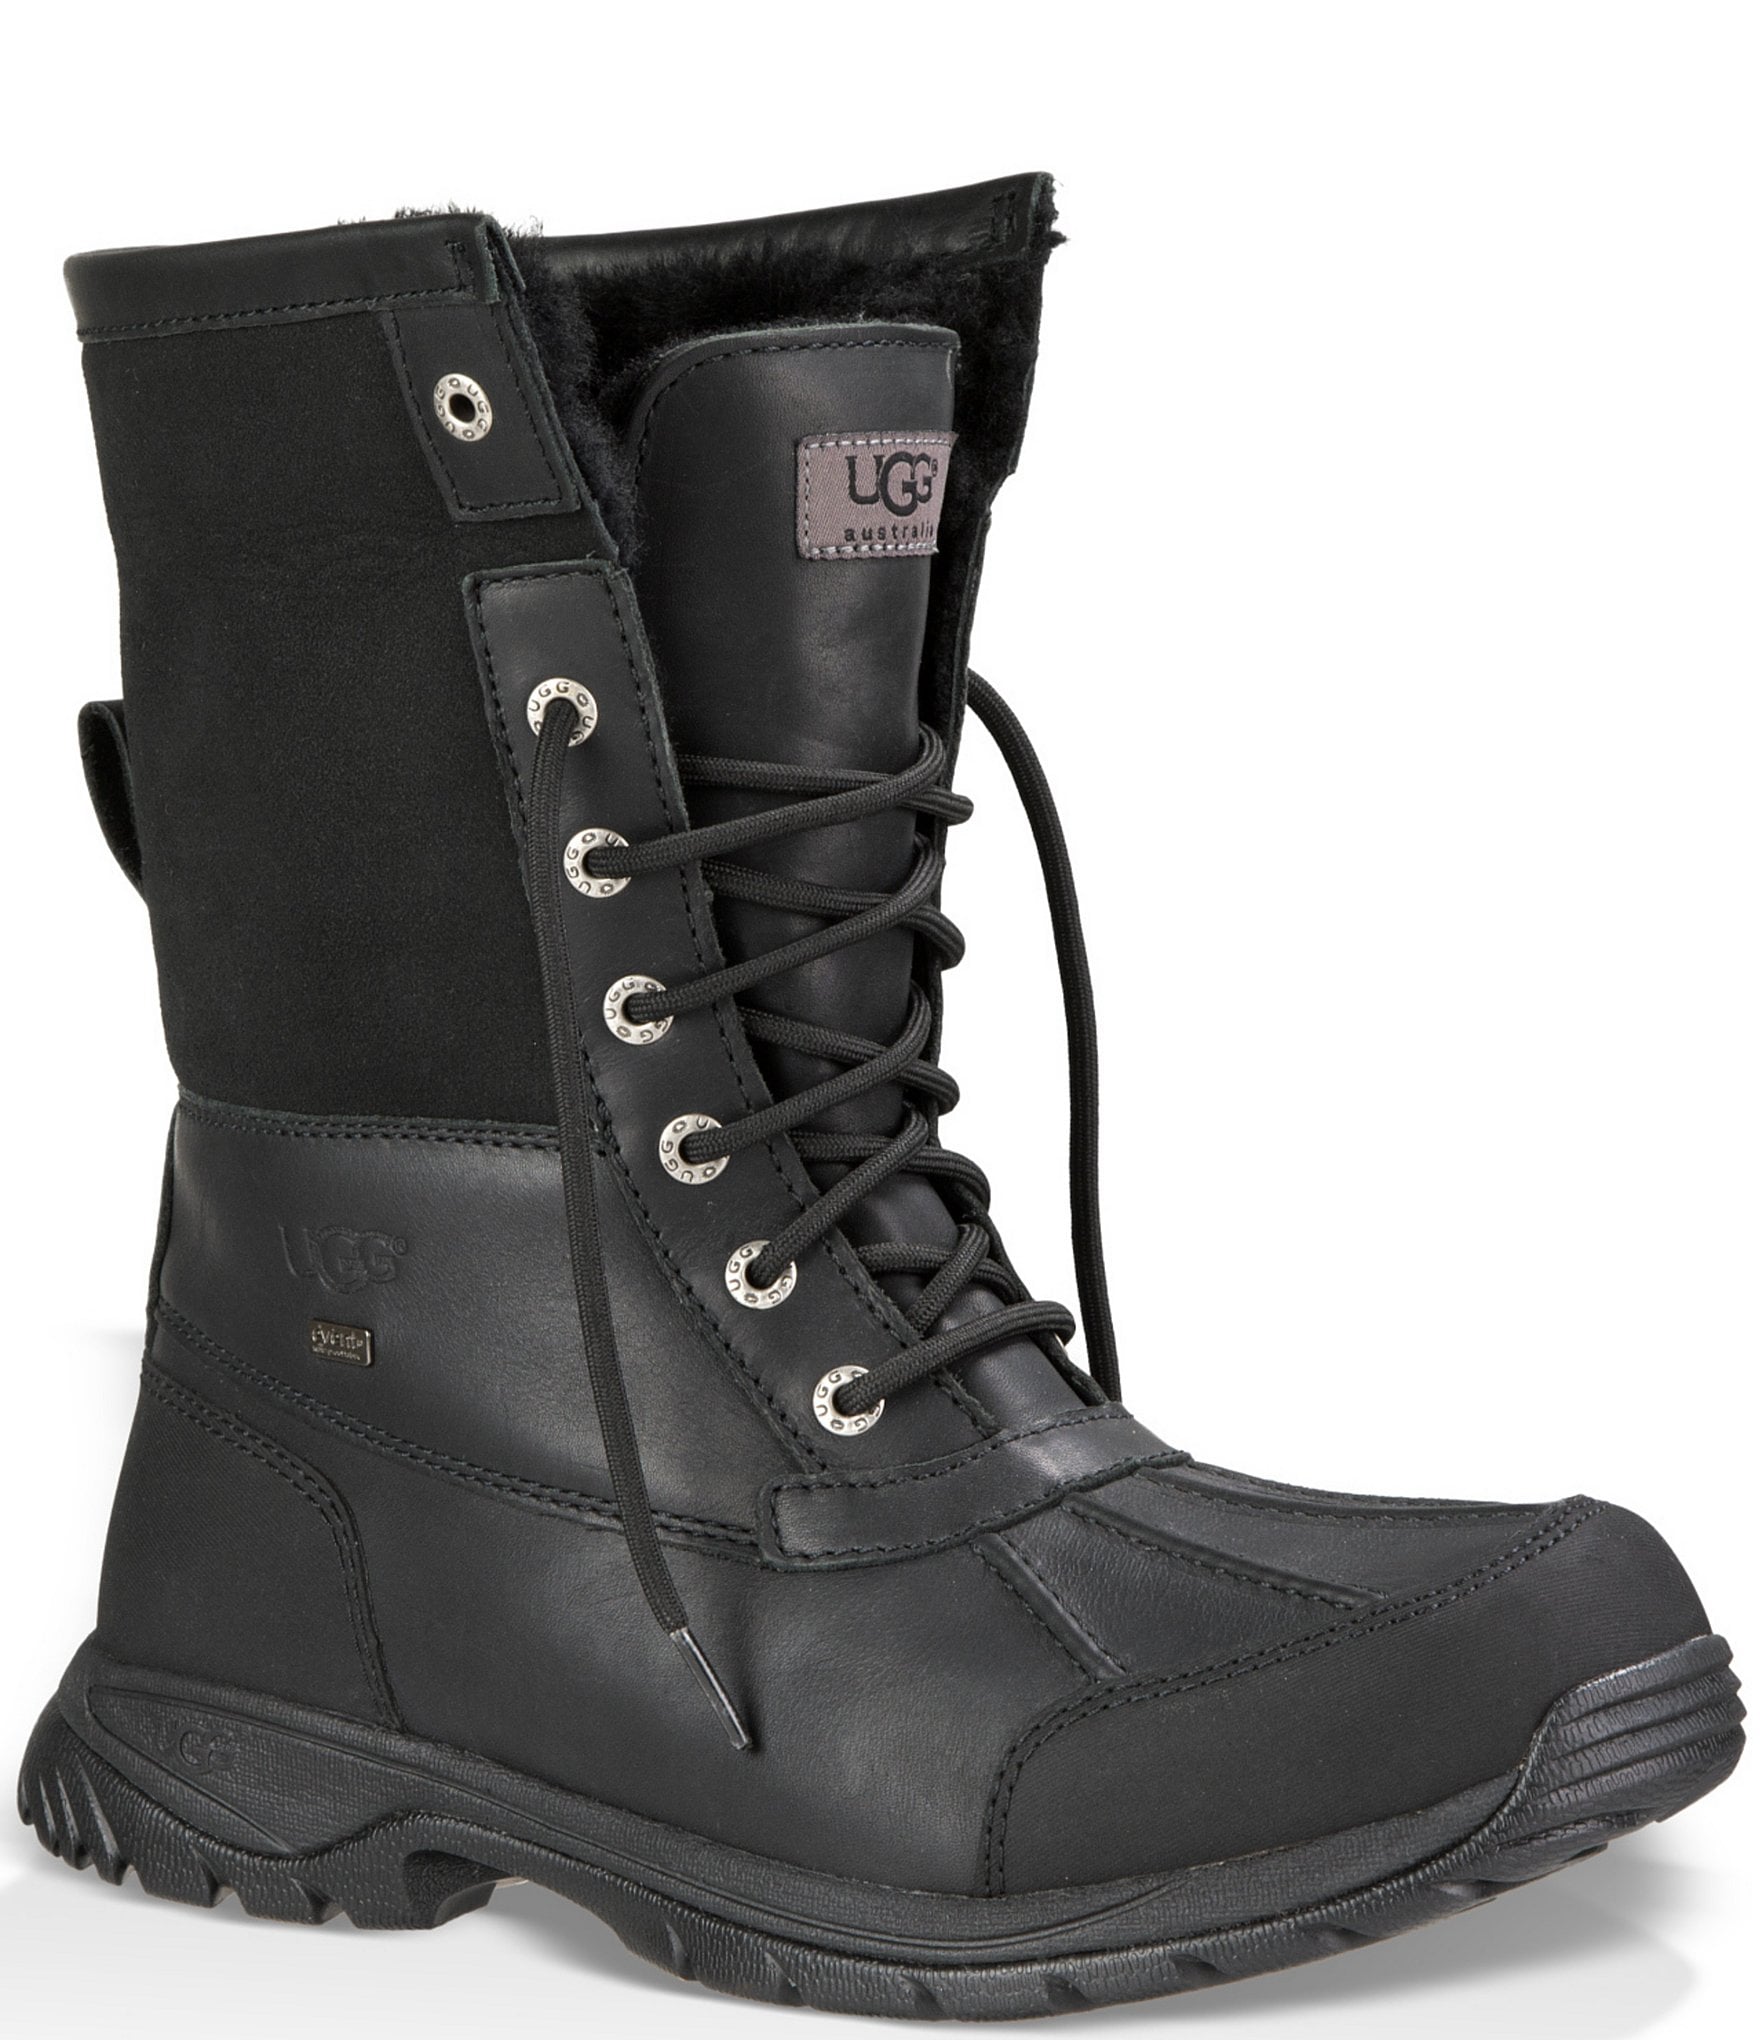 Ugg Australia All Weather Boots | Division of Global Affairs